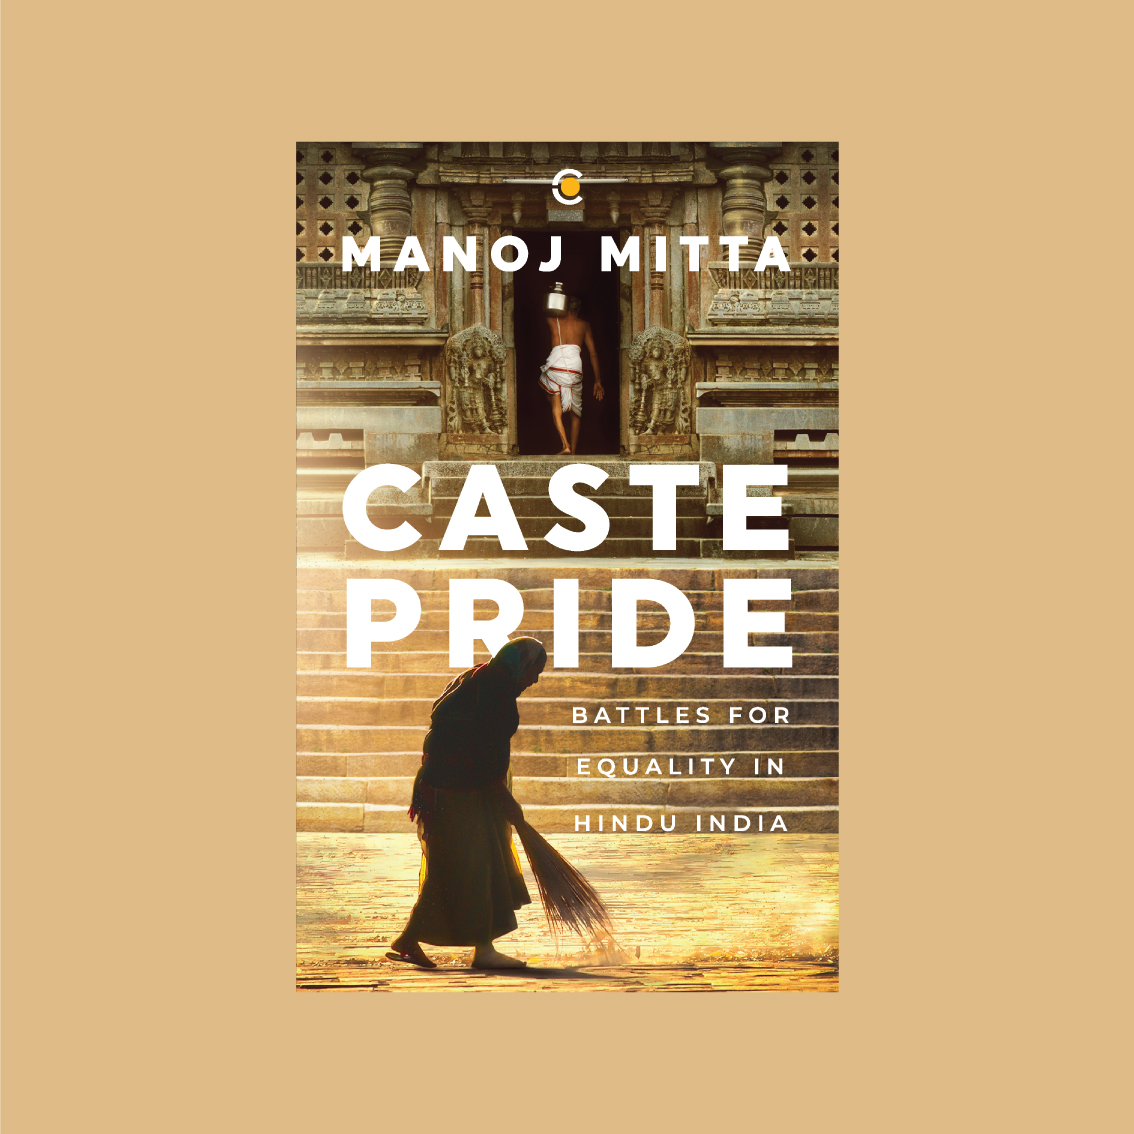 #ReadandElect

Manoj Mitta's urgent and timely book charts the legal history of #caste in India.

This #Election2024 pick up #CastePride from your nearest bookstore or online. 

@ContextIndia #LokSabhaElections2024